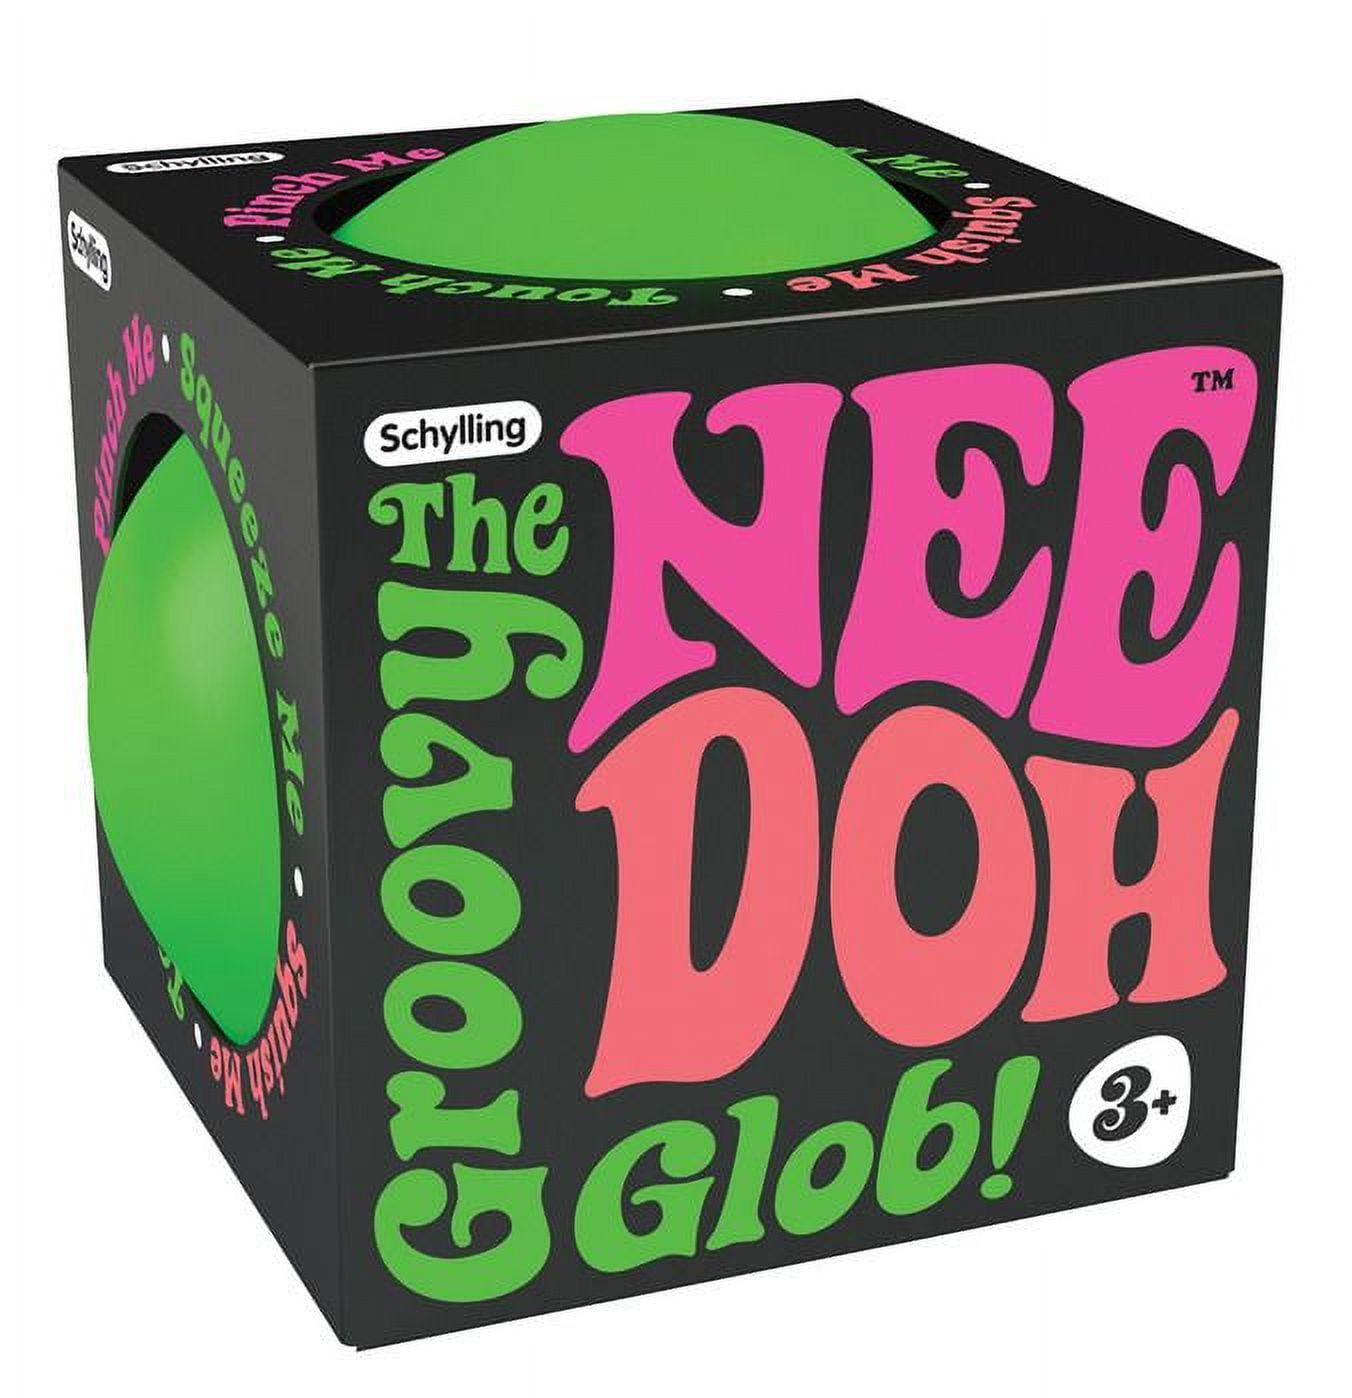 Nee Doh Groovy Glob Squeeze Novelty Toy, Colors Vary, Children